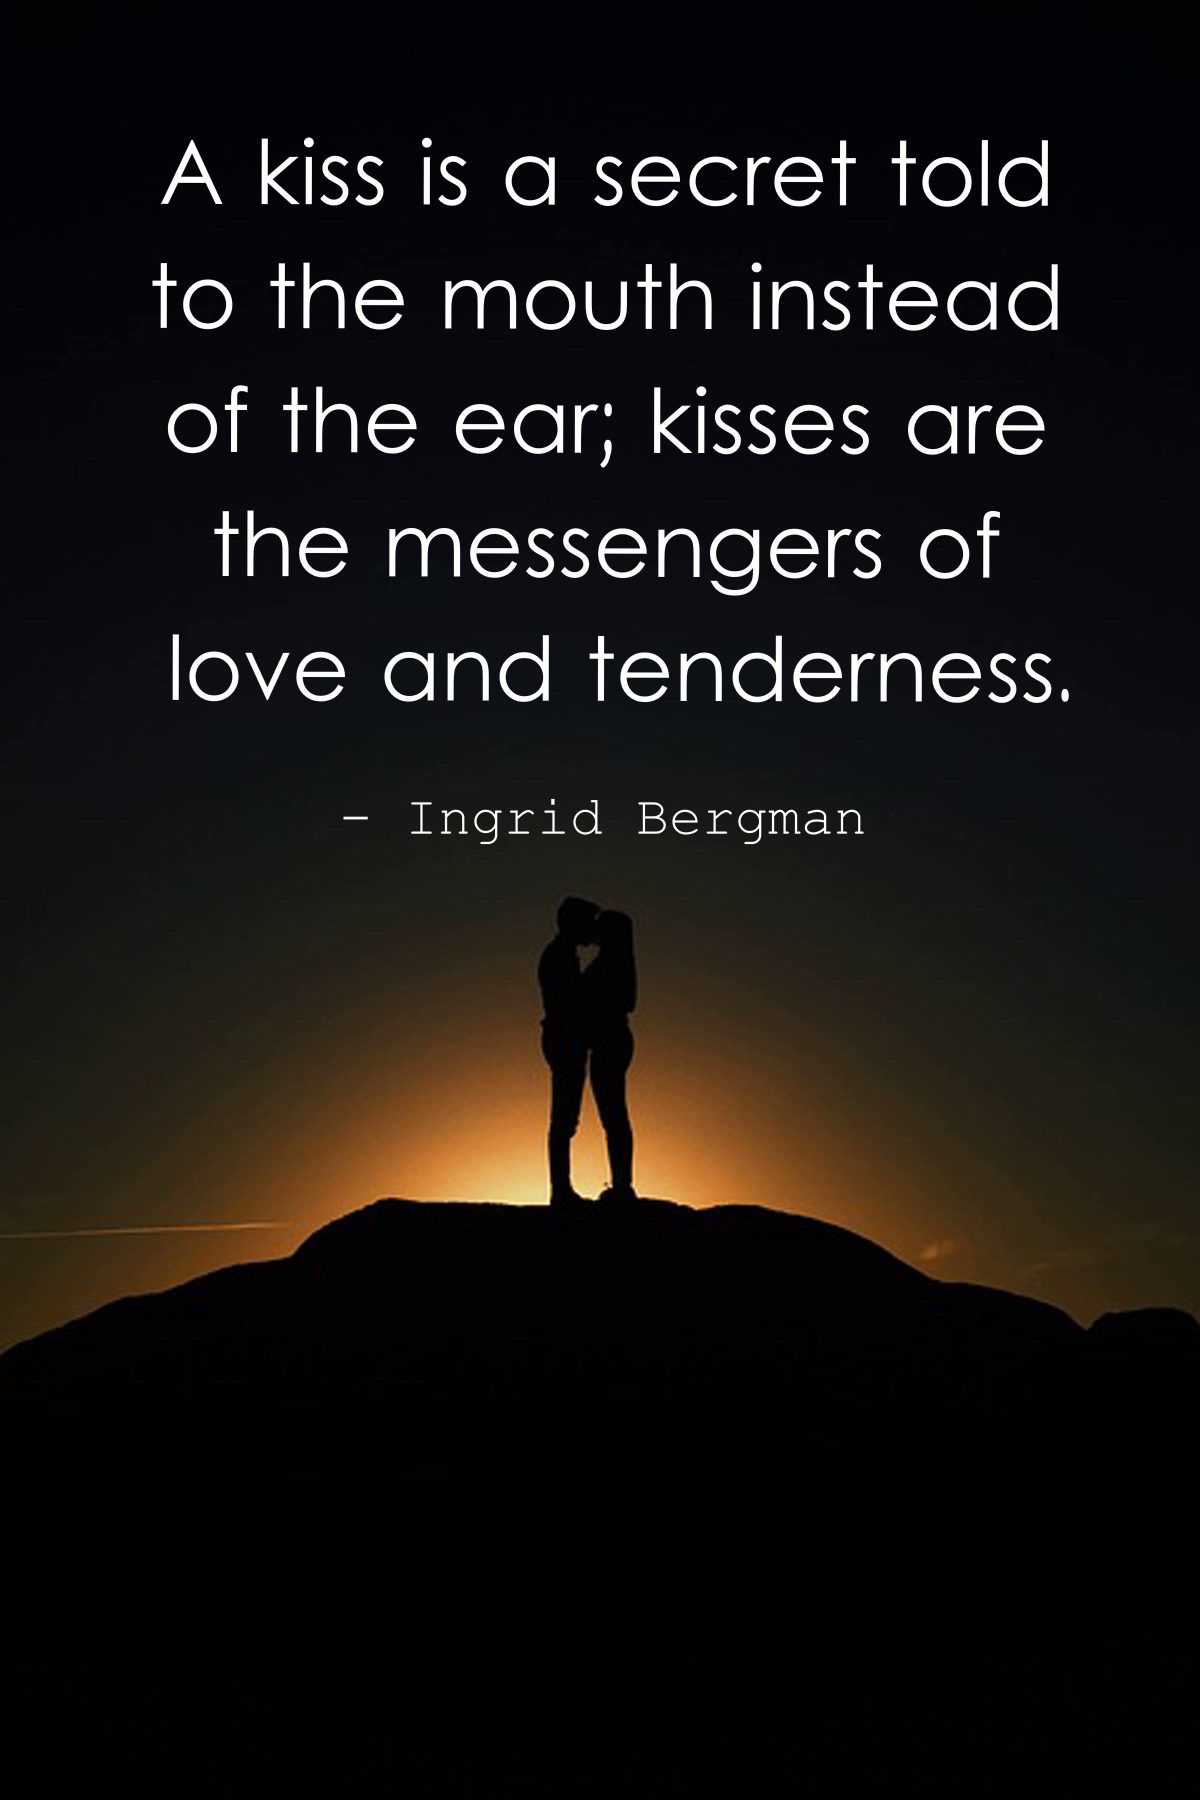 A kiss is a secret told to the mouth instead of the ear kisses are the messengers of love and tenderness.